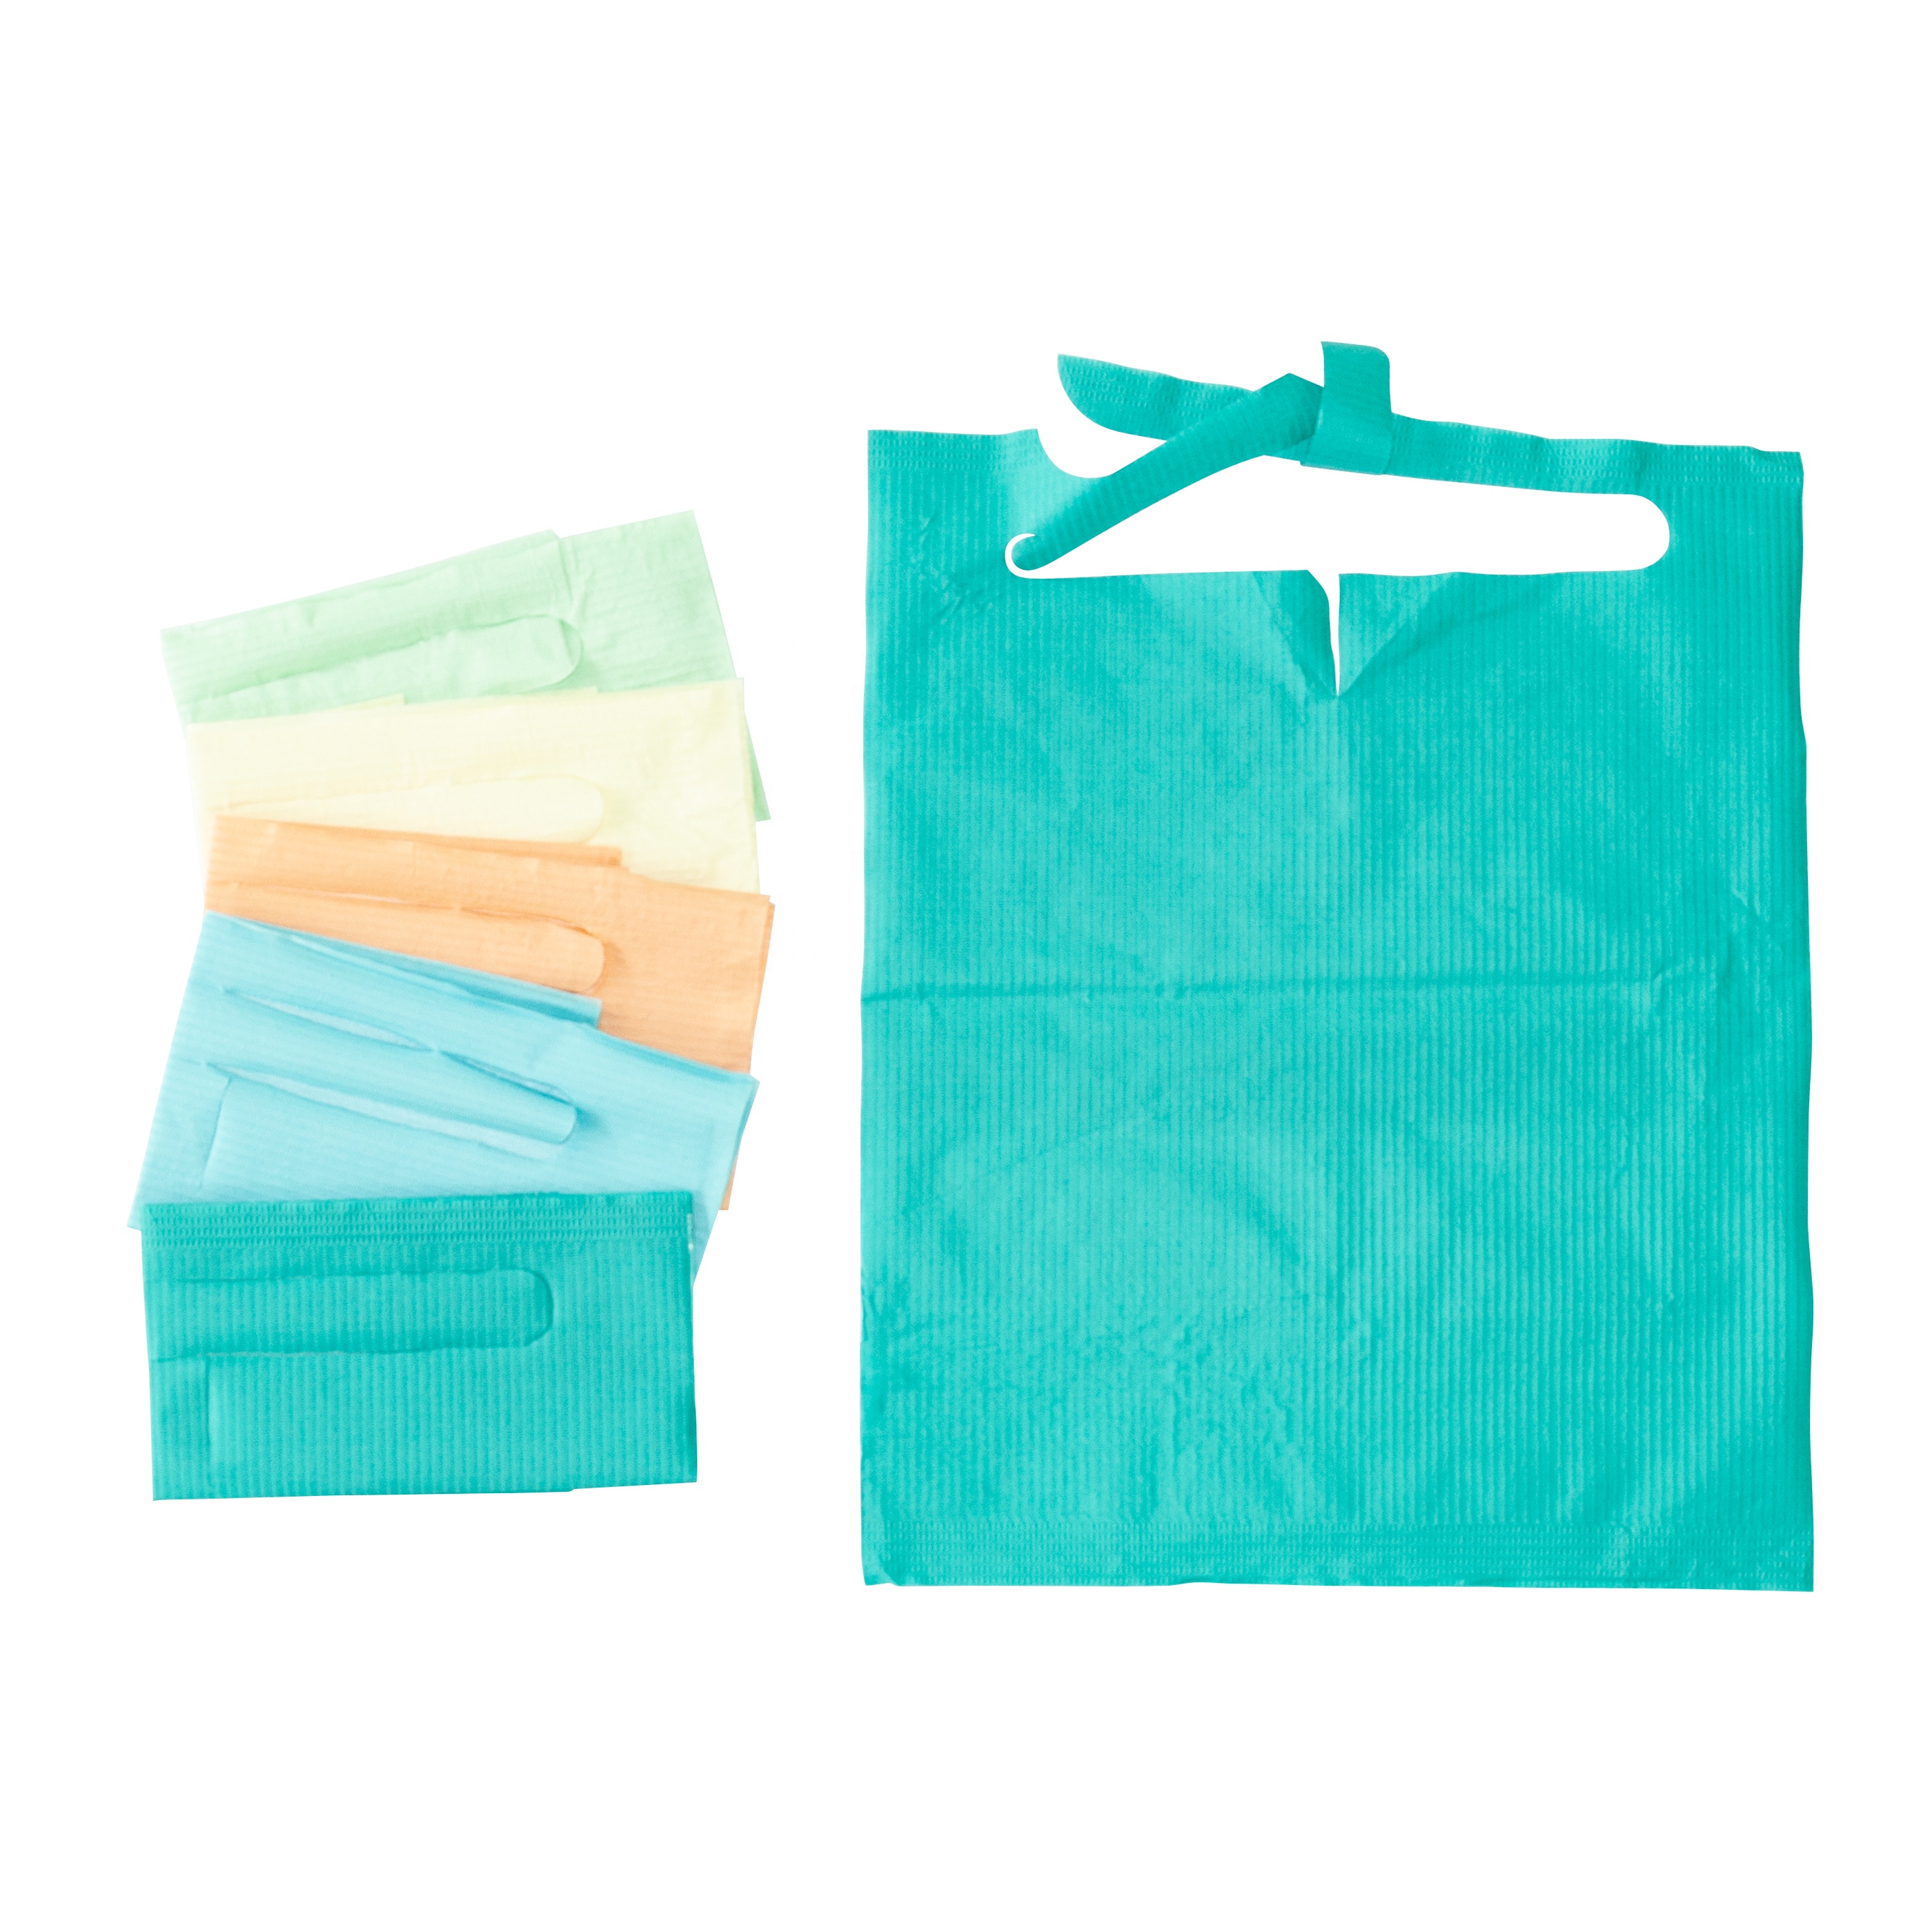 Stay Comfortable and Protected: Discover the Benefits of Disposable Dental Bibs with Loop Waterproof